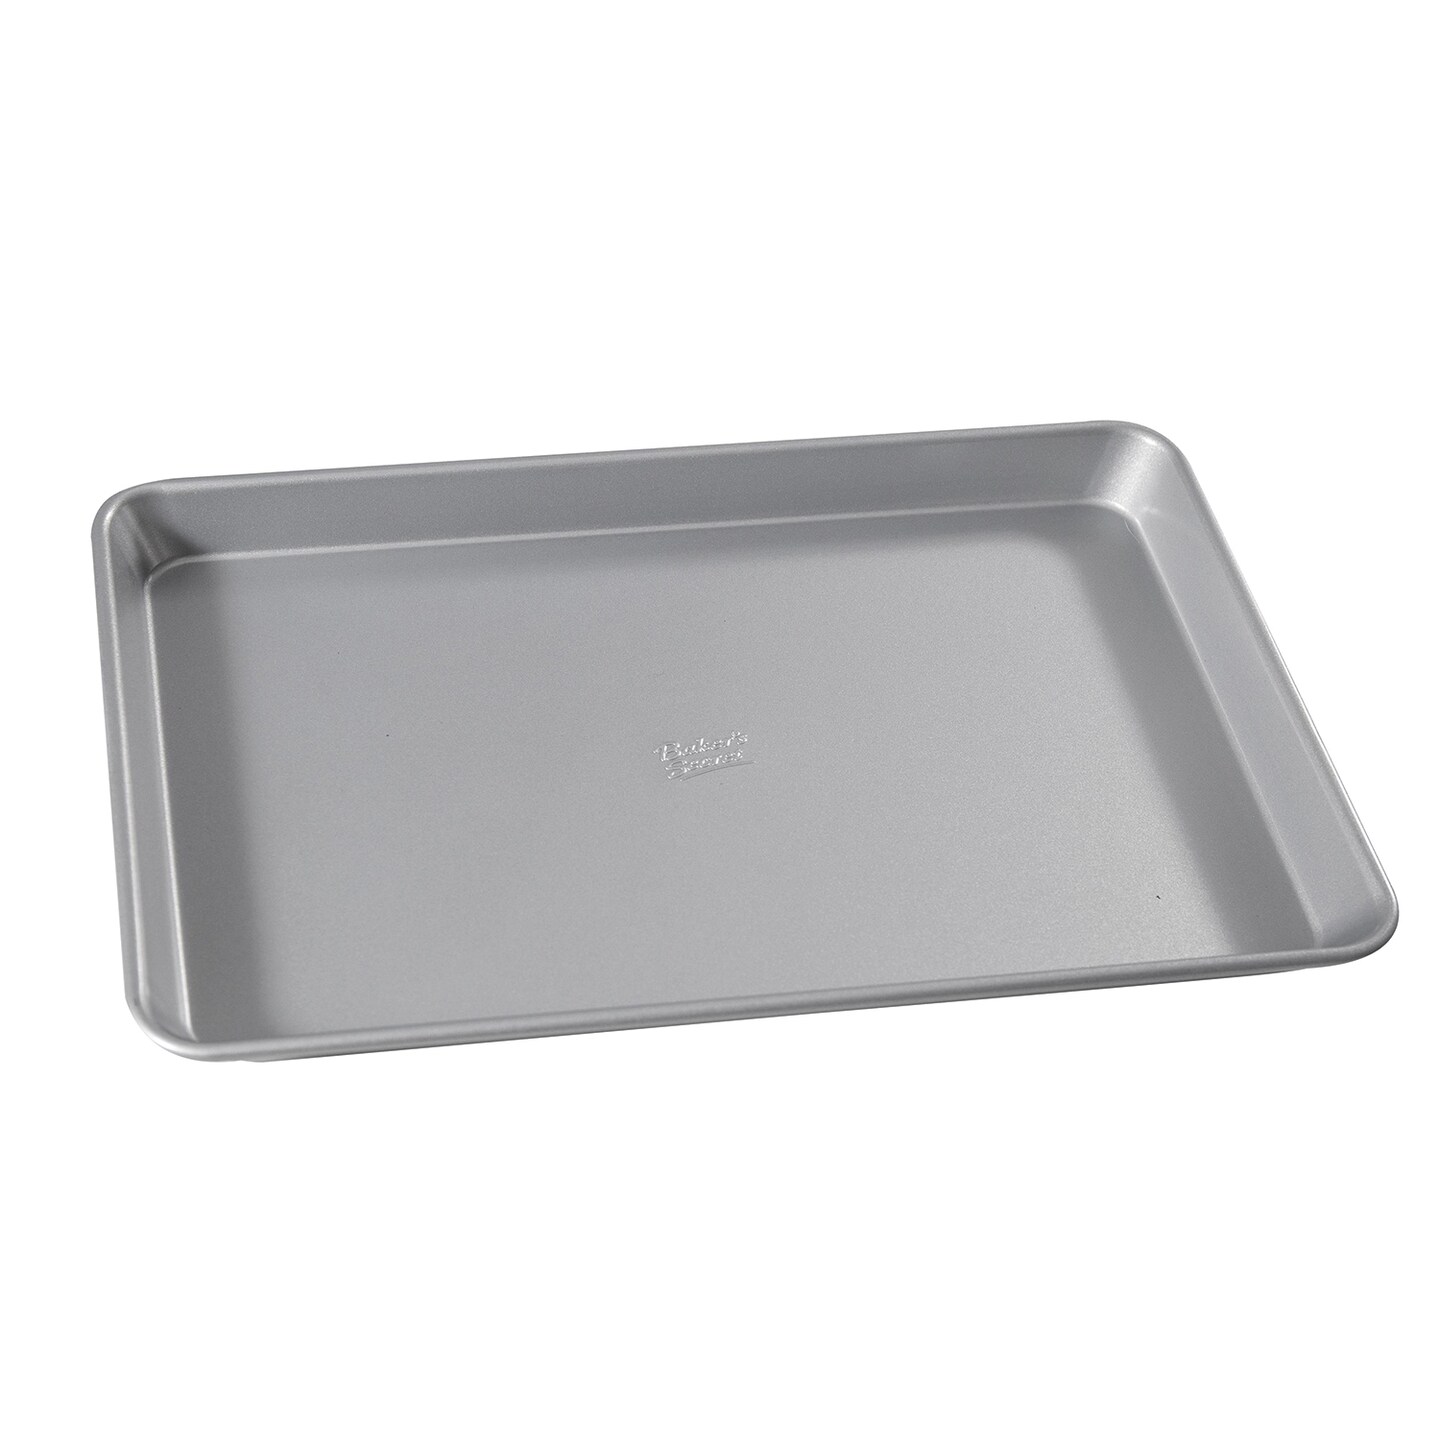 Baker's Secret Nonstick Large Cookie Sheet 18 x 13, Aluminized Steel  Large Size Cookie Tray Jelly Roll with 2 Layers Non-stick Coating, Bakeware  Baking Accessories - Superb Collection